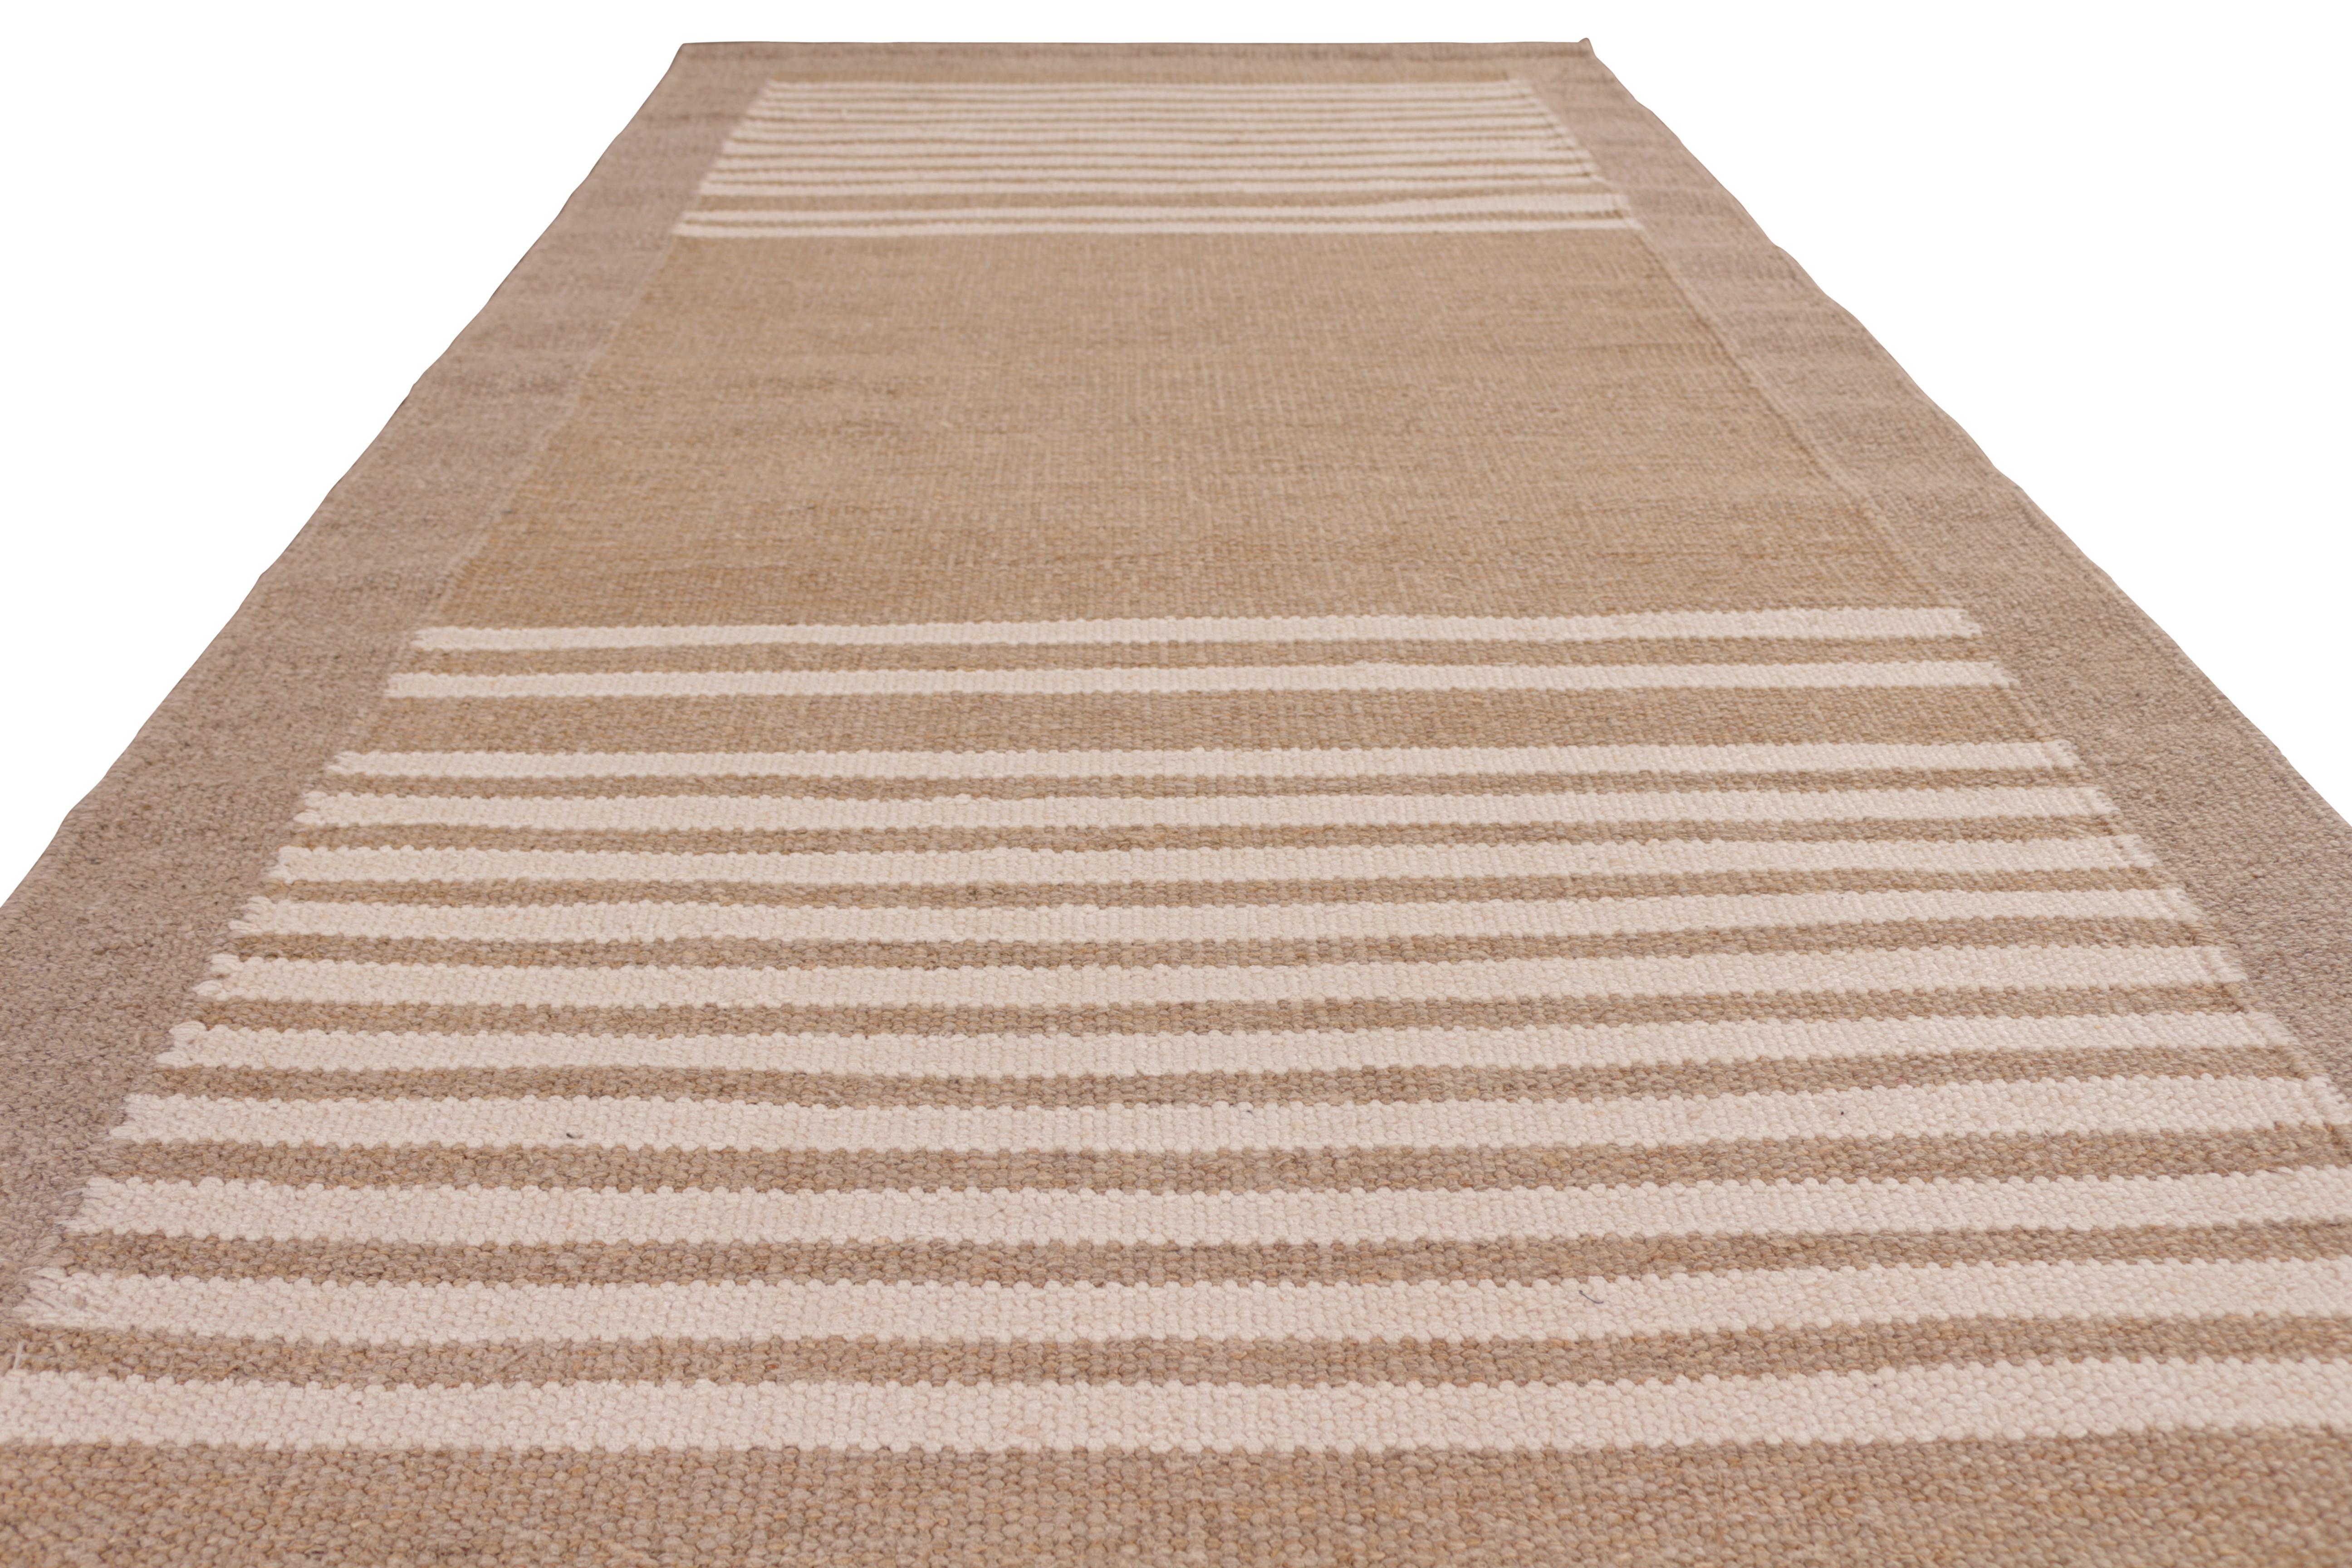 A 4 x 8 hemp and aloe runner from the all-natural line of Rug & Kilim’s Scandinavian Collection. Enjoying forgiving beige-brown hues in a simple series of stripes and open field, well suited to wide hallways and entryways. 

Custom capable: Please